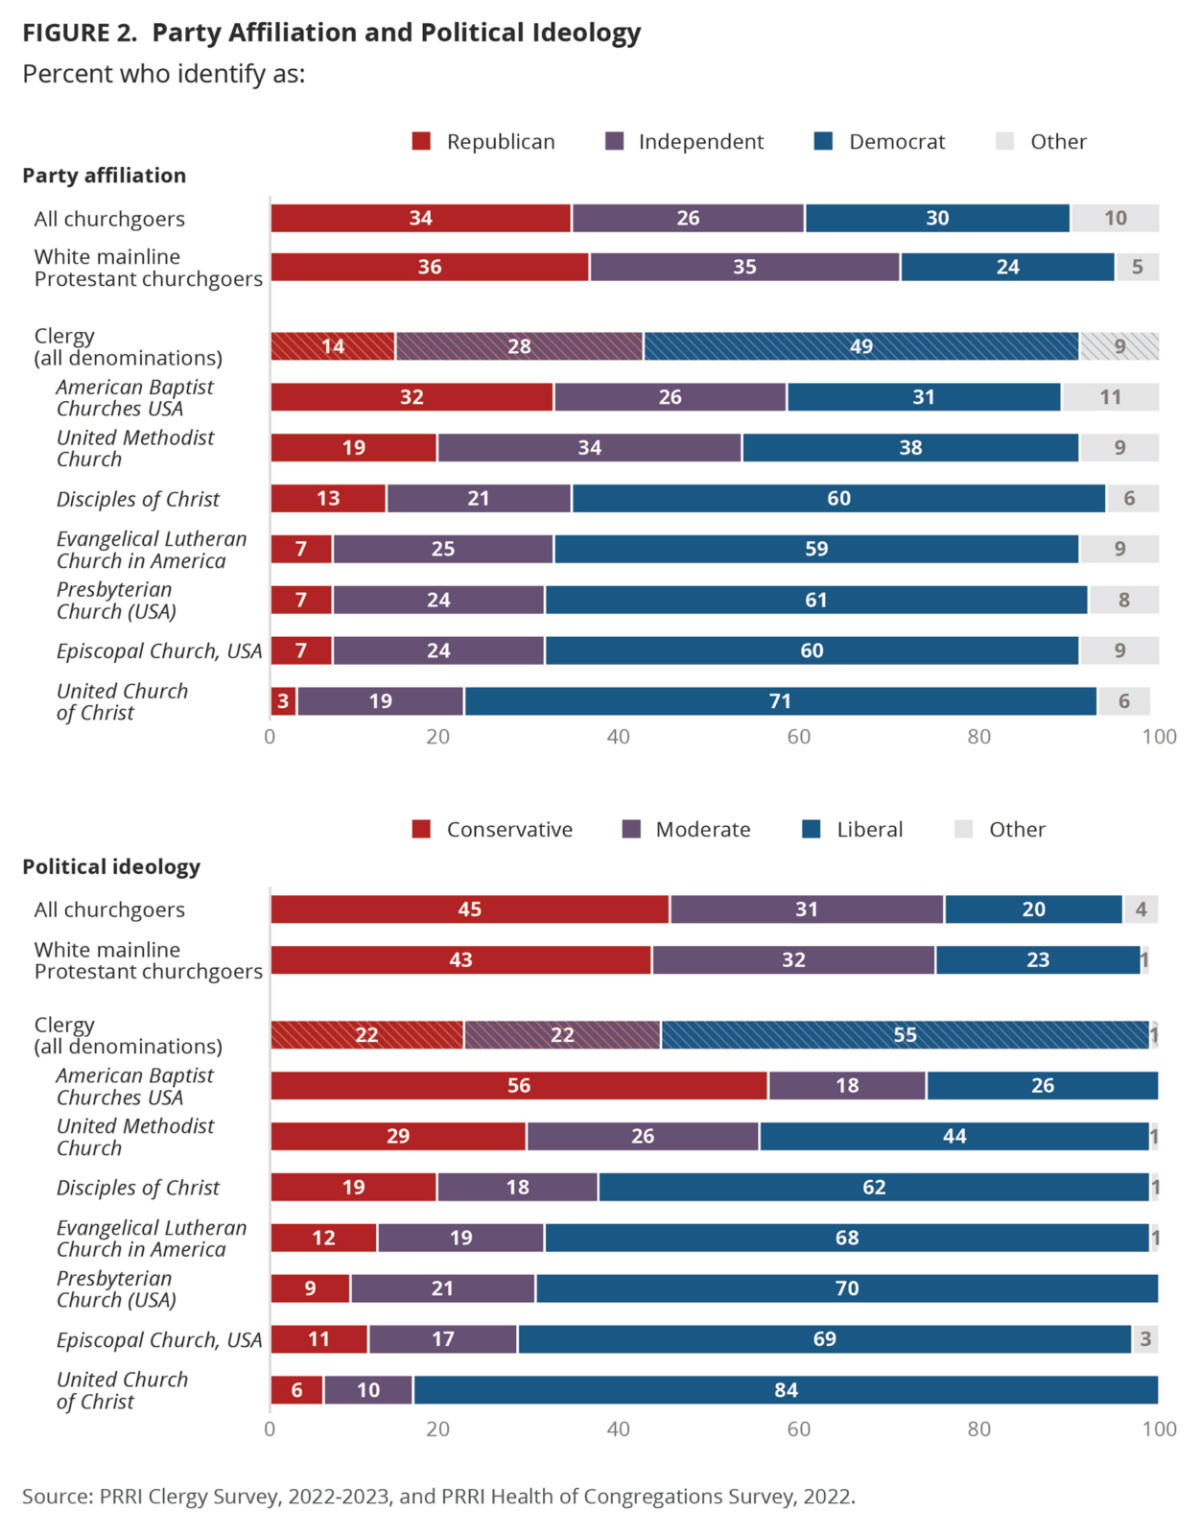 "Party Affiliation and Political Ideology" Graphic courtesy PRRI